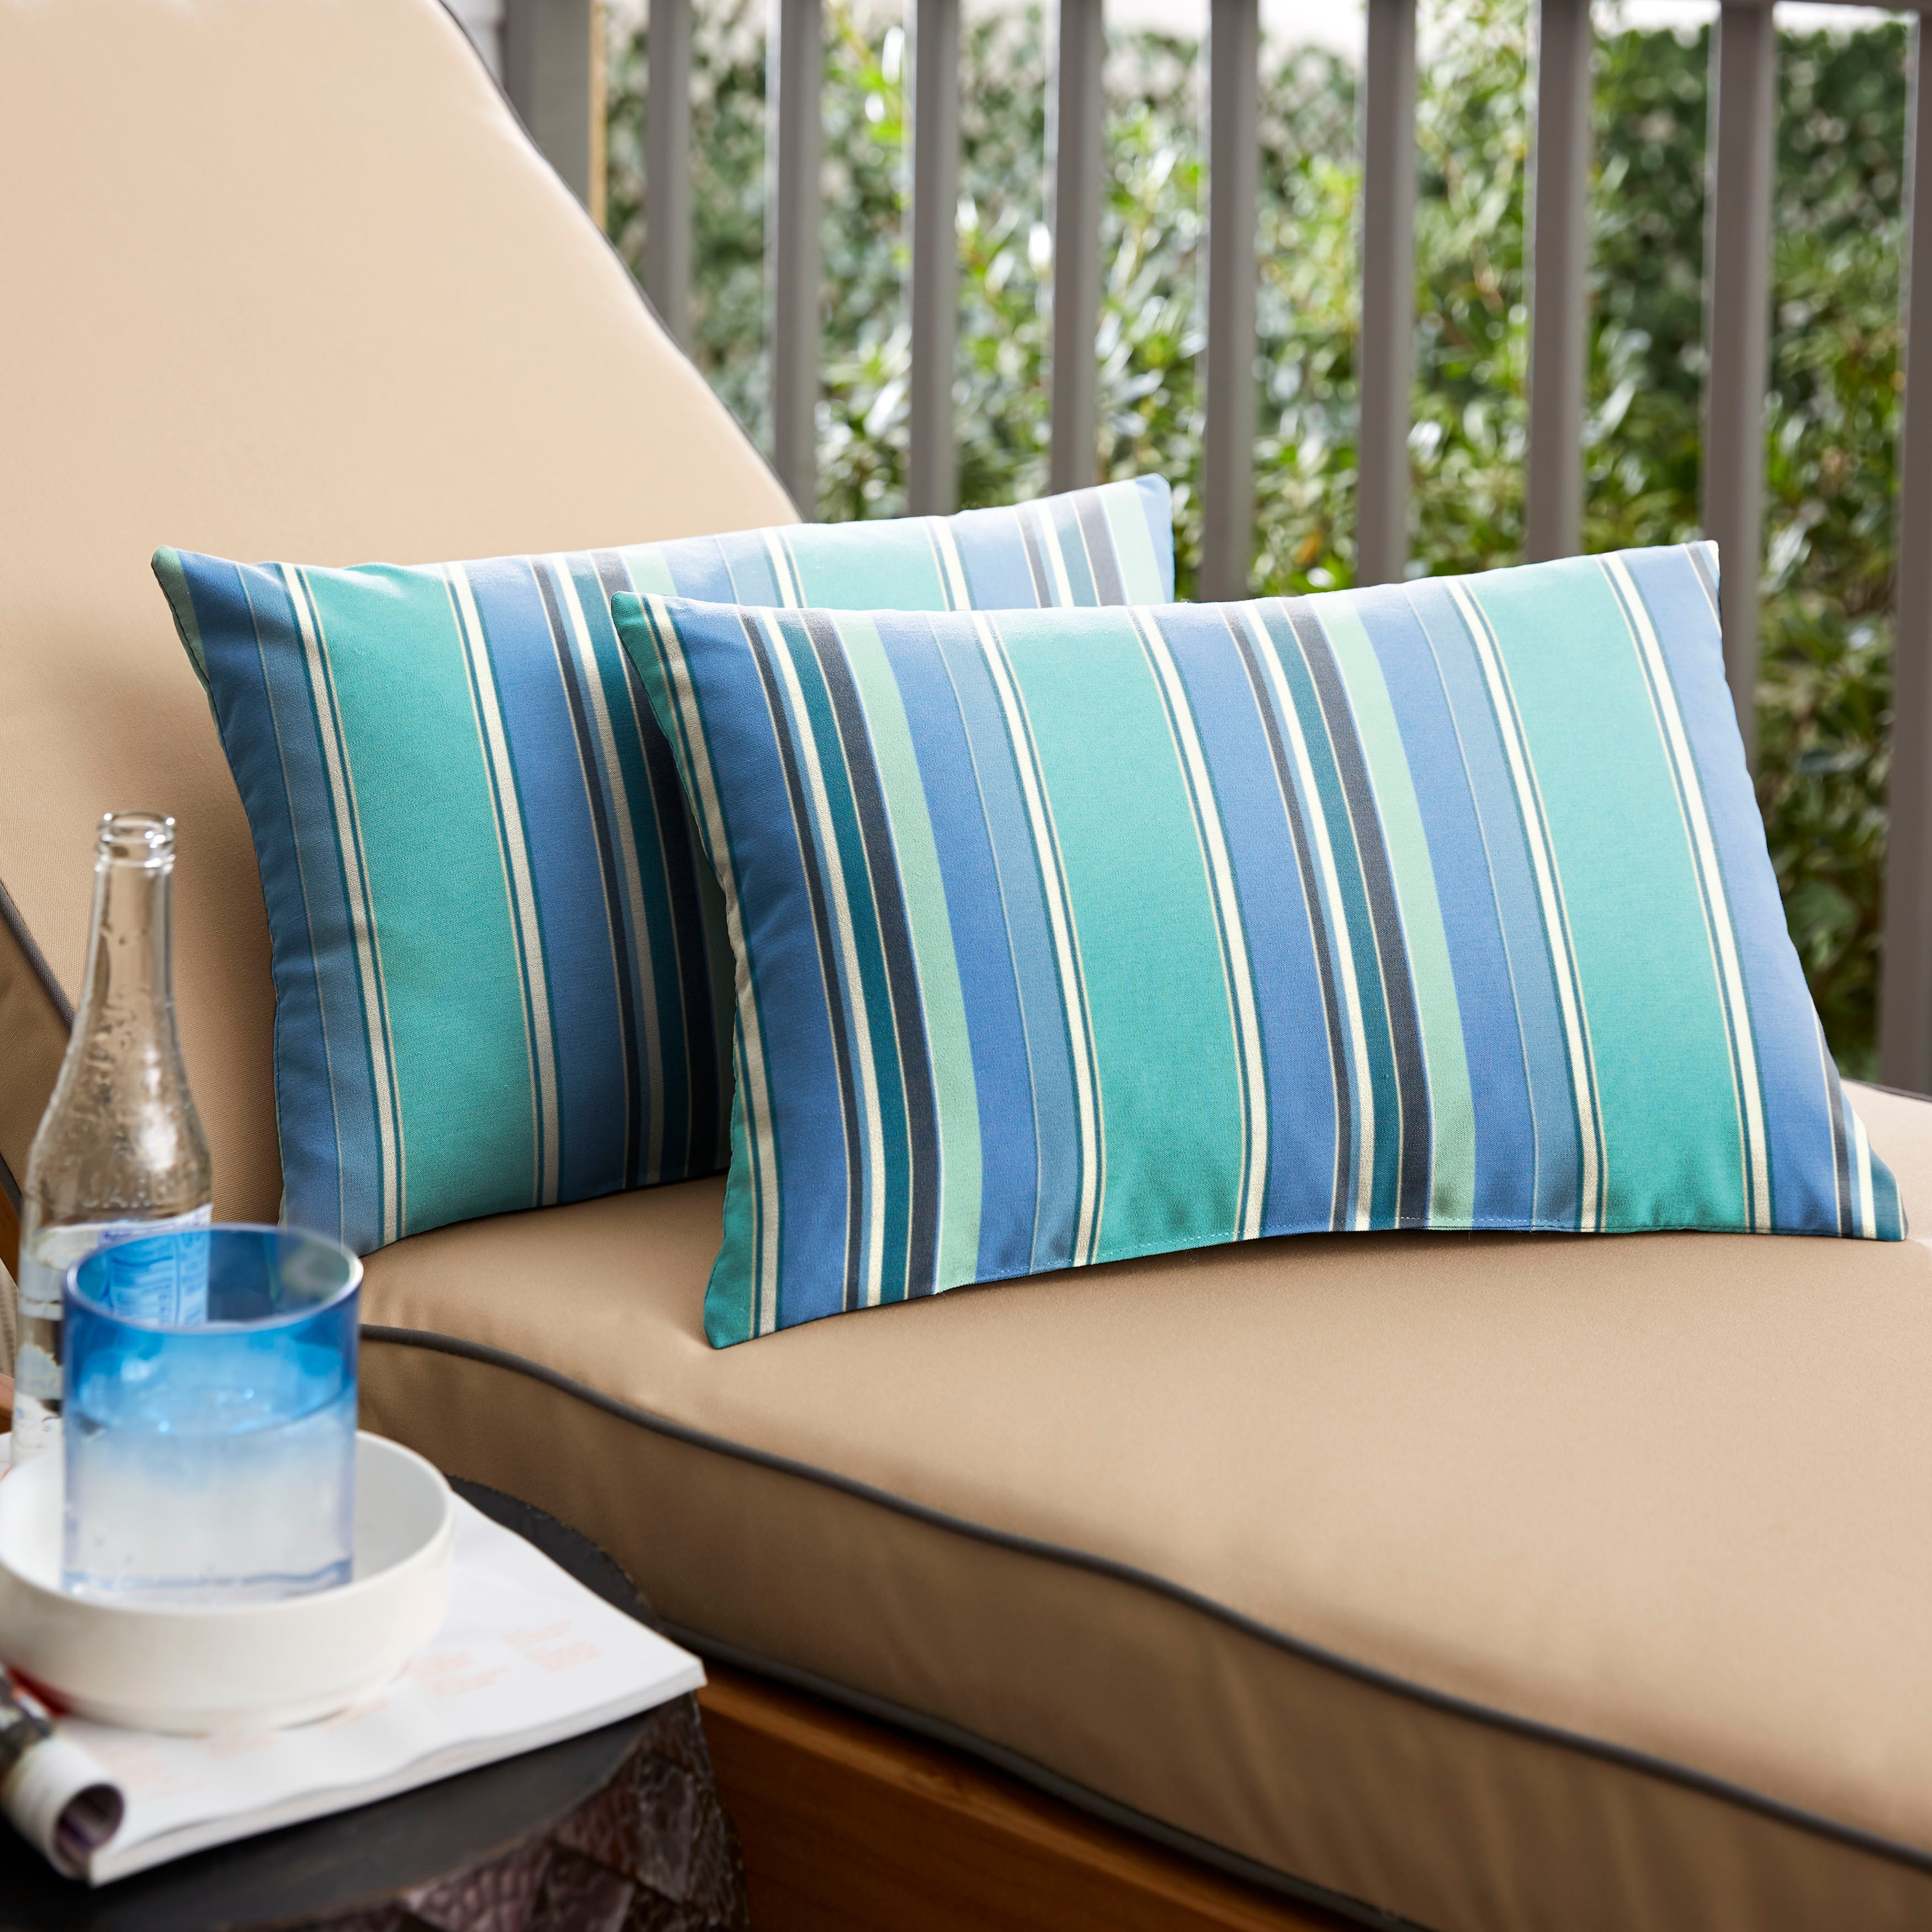 https://ak1.ostkcdn.com/images/products/is/images/direct/a445d8a2b3361c027b6d63fb7557965c17f1adb2/Dolce-Oasis-Knife-edge-Outdoor-Pillows-with-Sunbrella-Fabric-%28Set-of-2%29.jpg